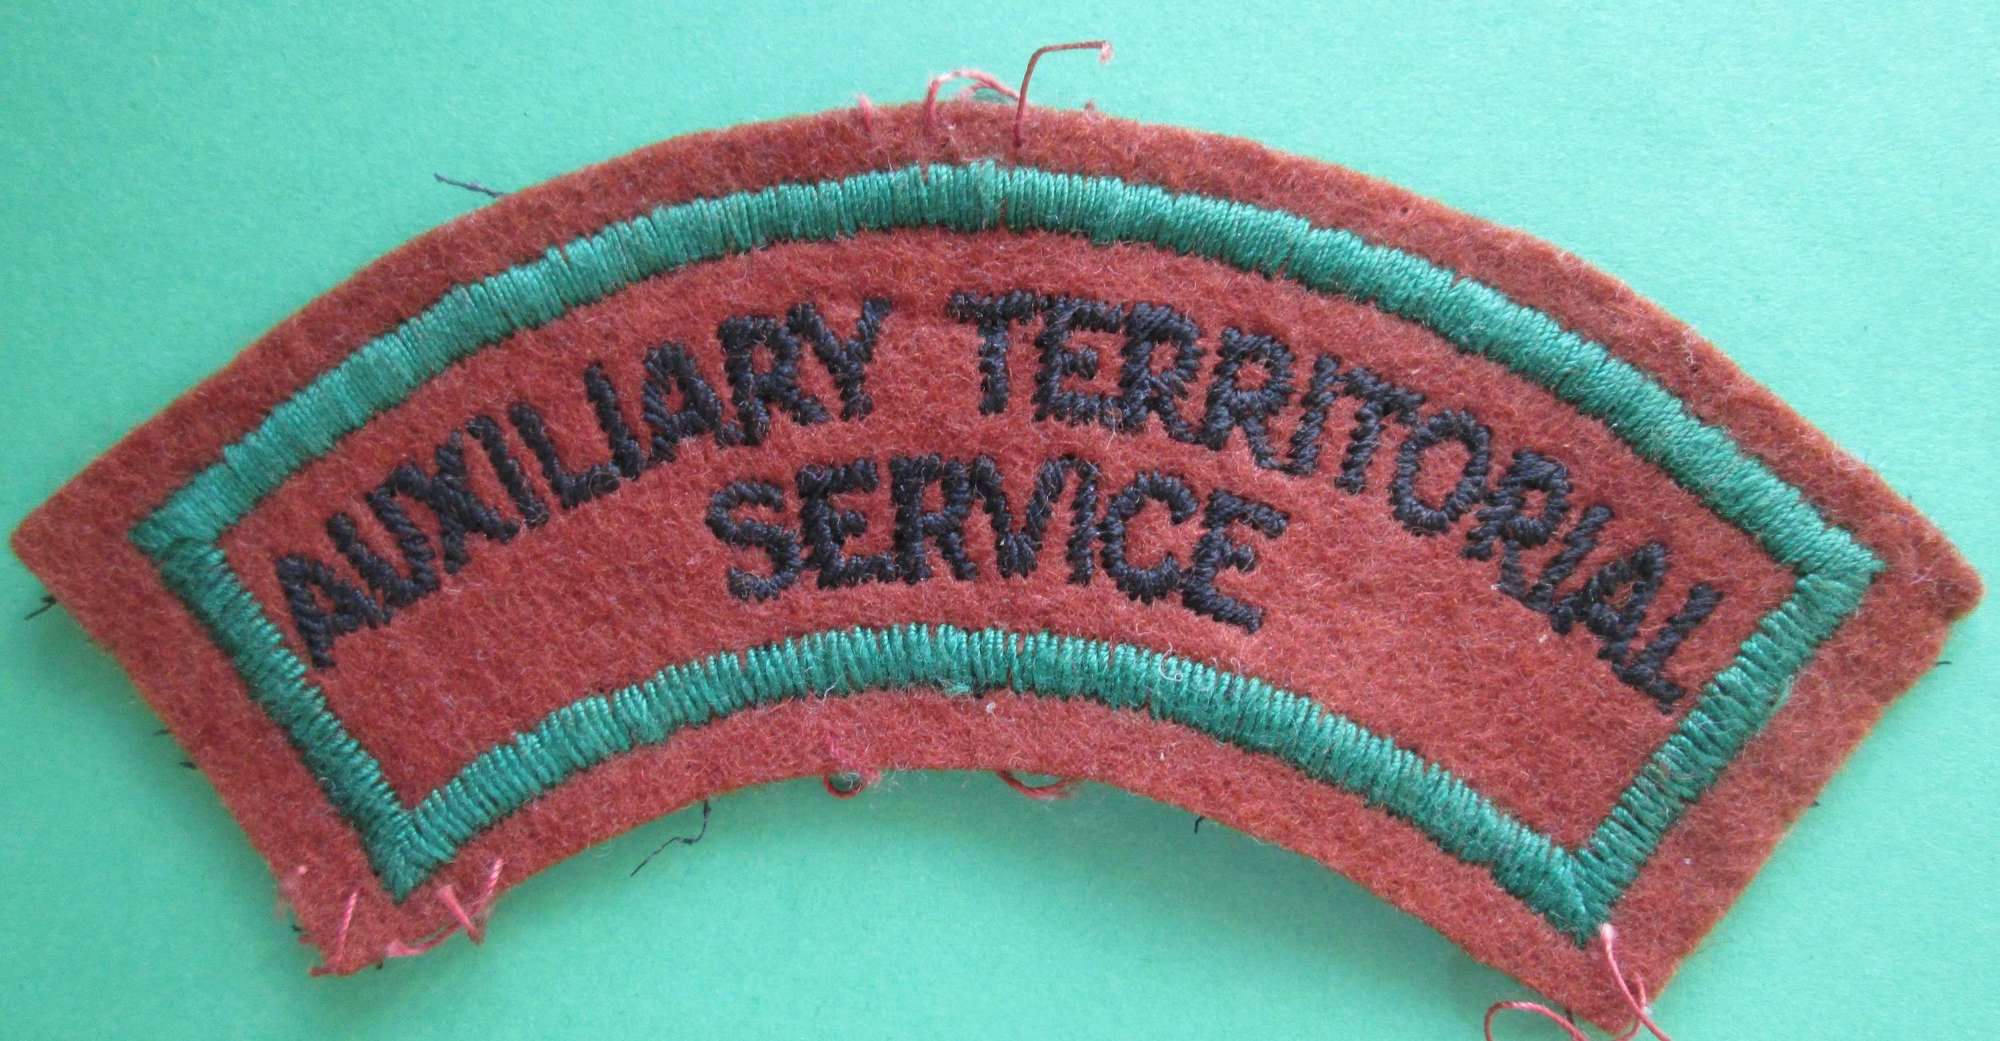 AUXILIARY TERRITORIAL SERVICE SHOULDER TITLE